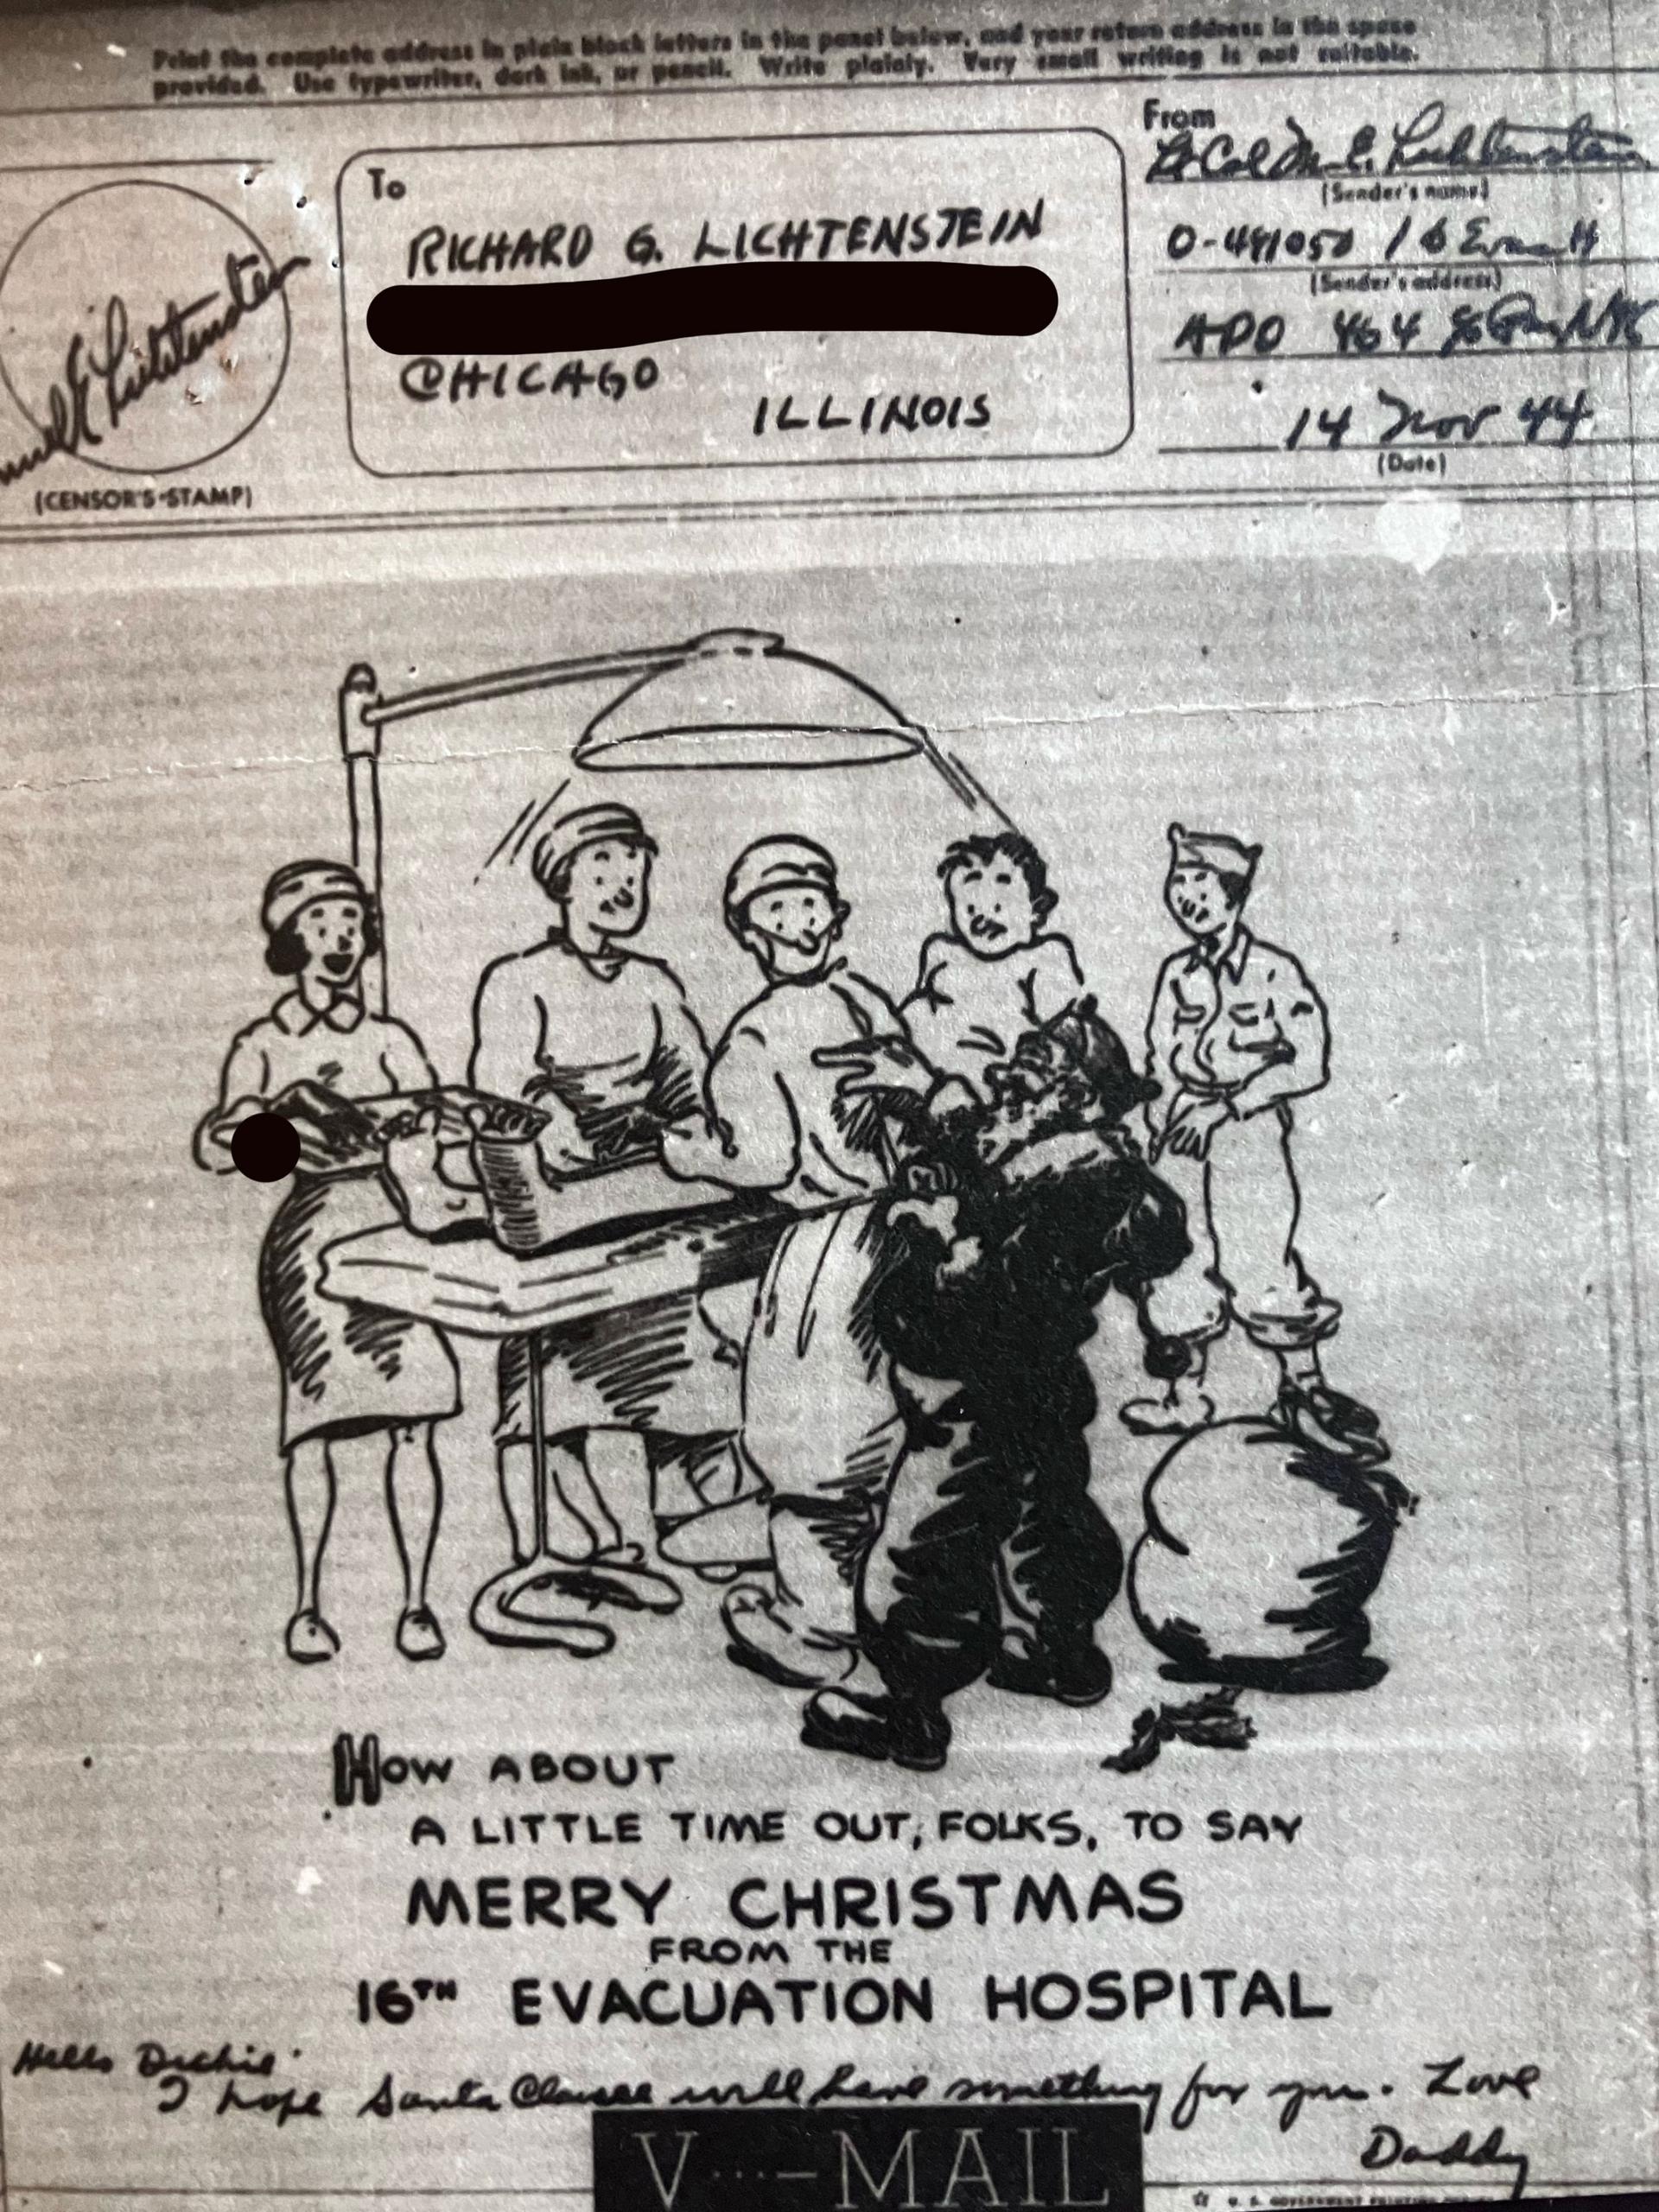 A Christmas greeting from Manuel E. Lichtenstein sent via "Victory Mail," 1944.